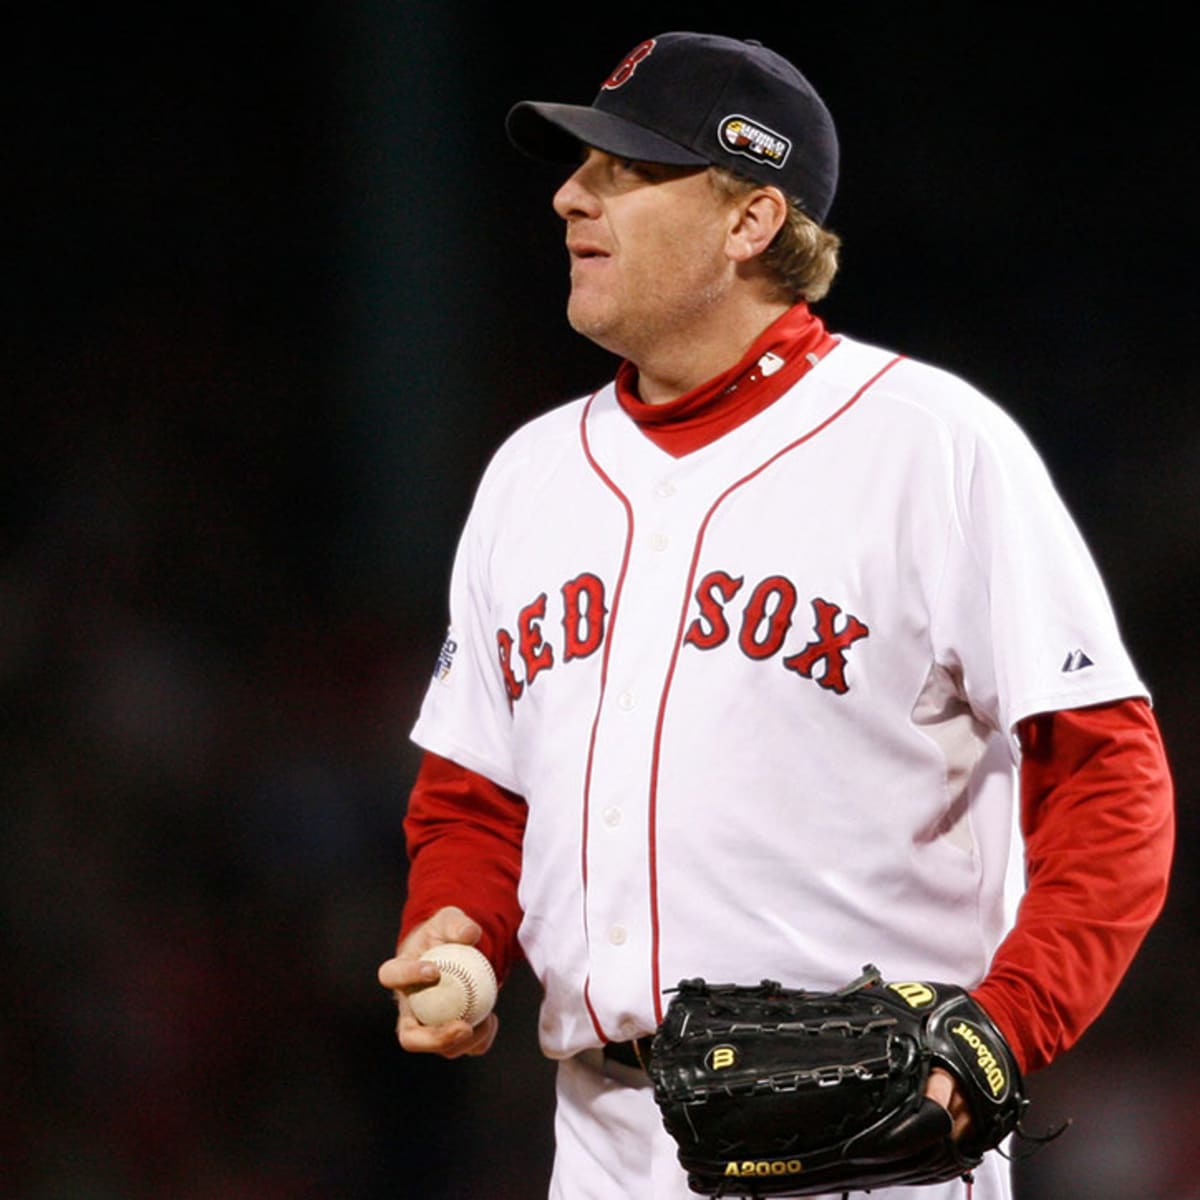 Curt Schilling blasts Baseball Hall of Fame after falling short, requests  off 2022 ballot